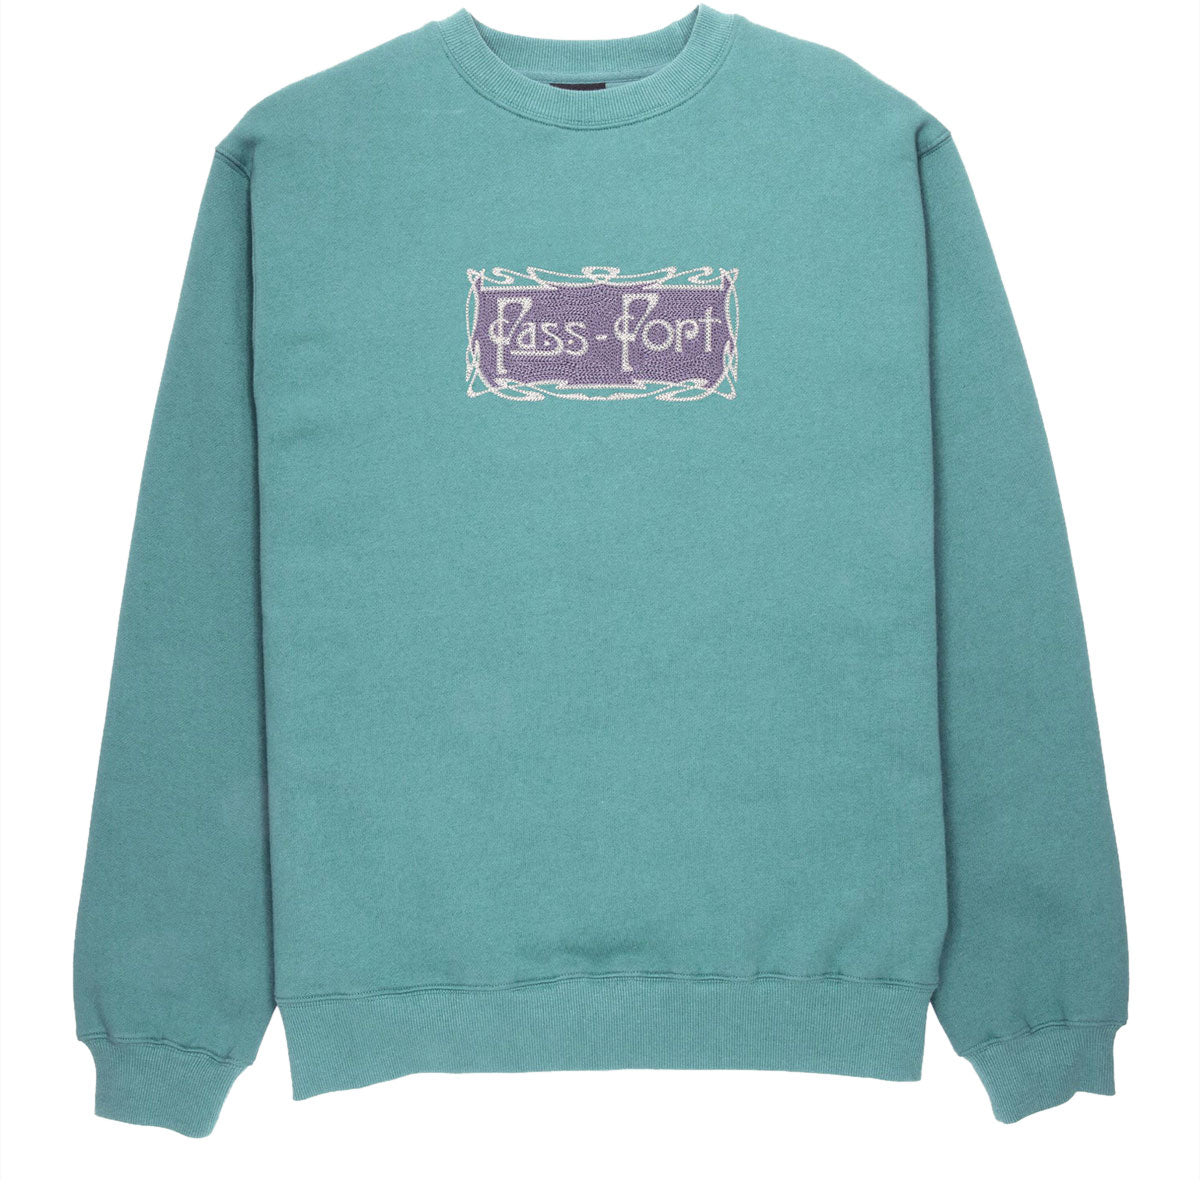 Passport Plume Sweater - Washed Out Teal image 1